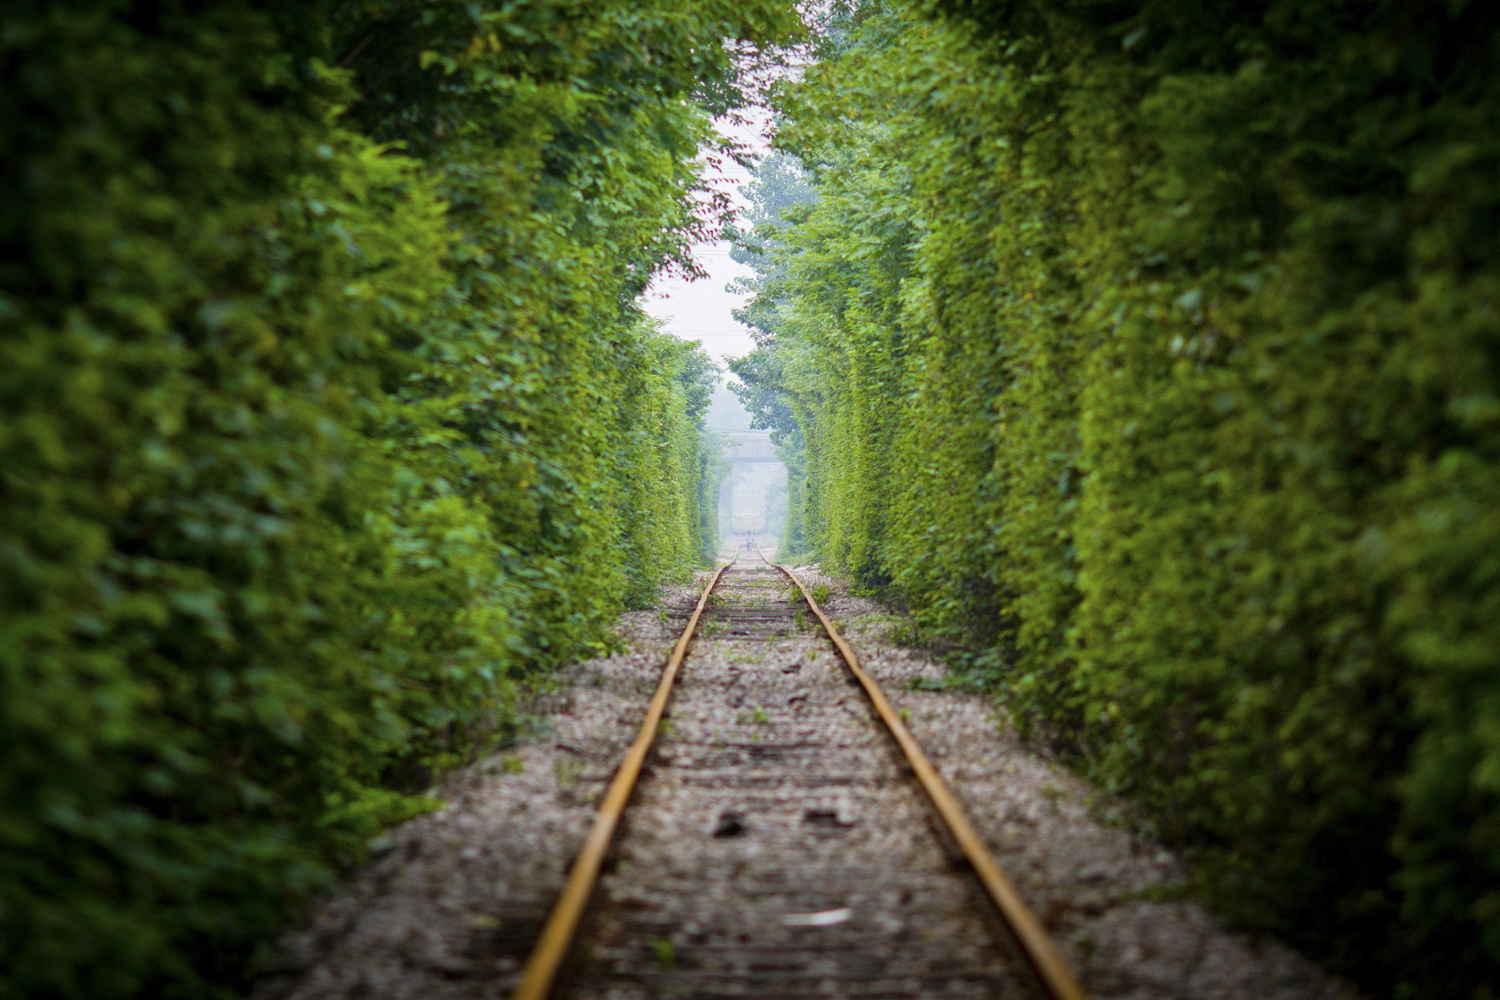 A resident walks along a railway track surrounded by trees on both sides, in Nanjing